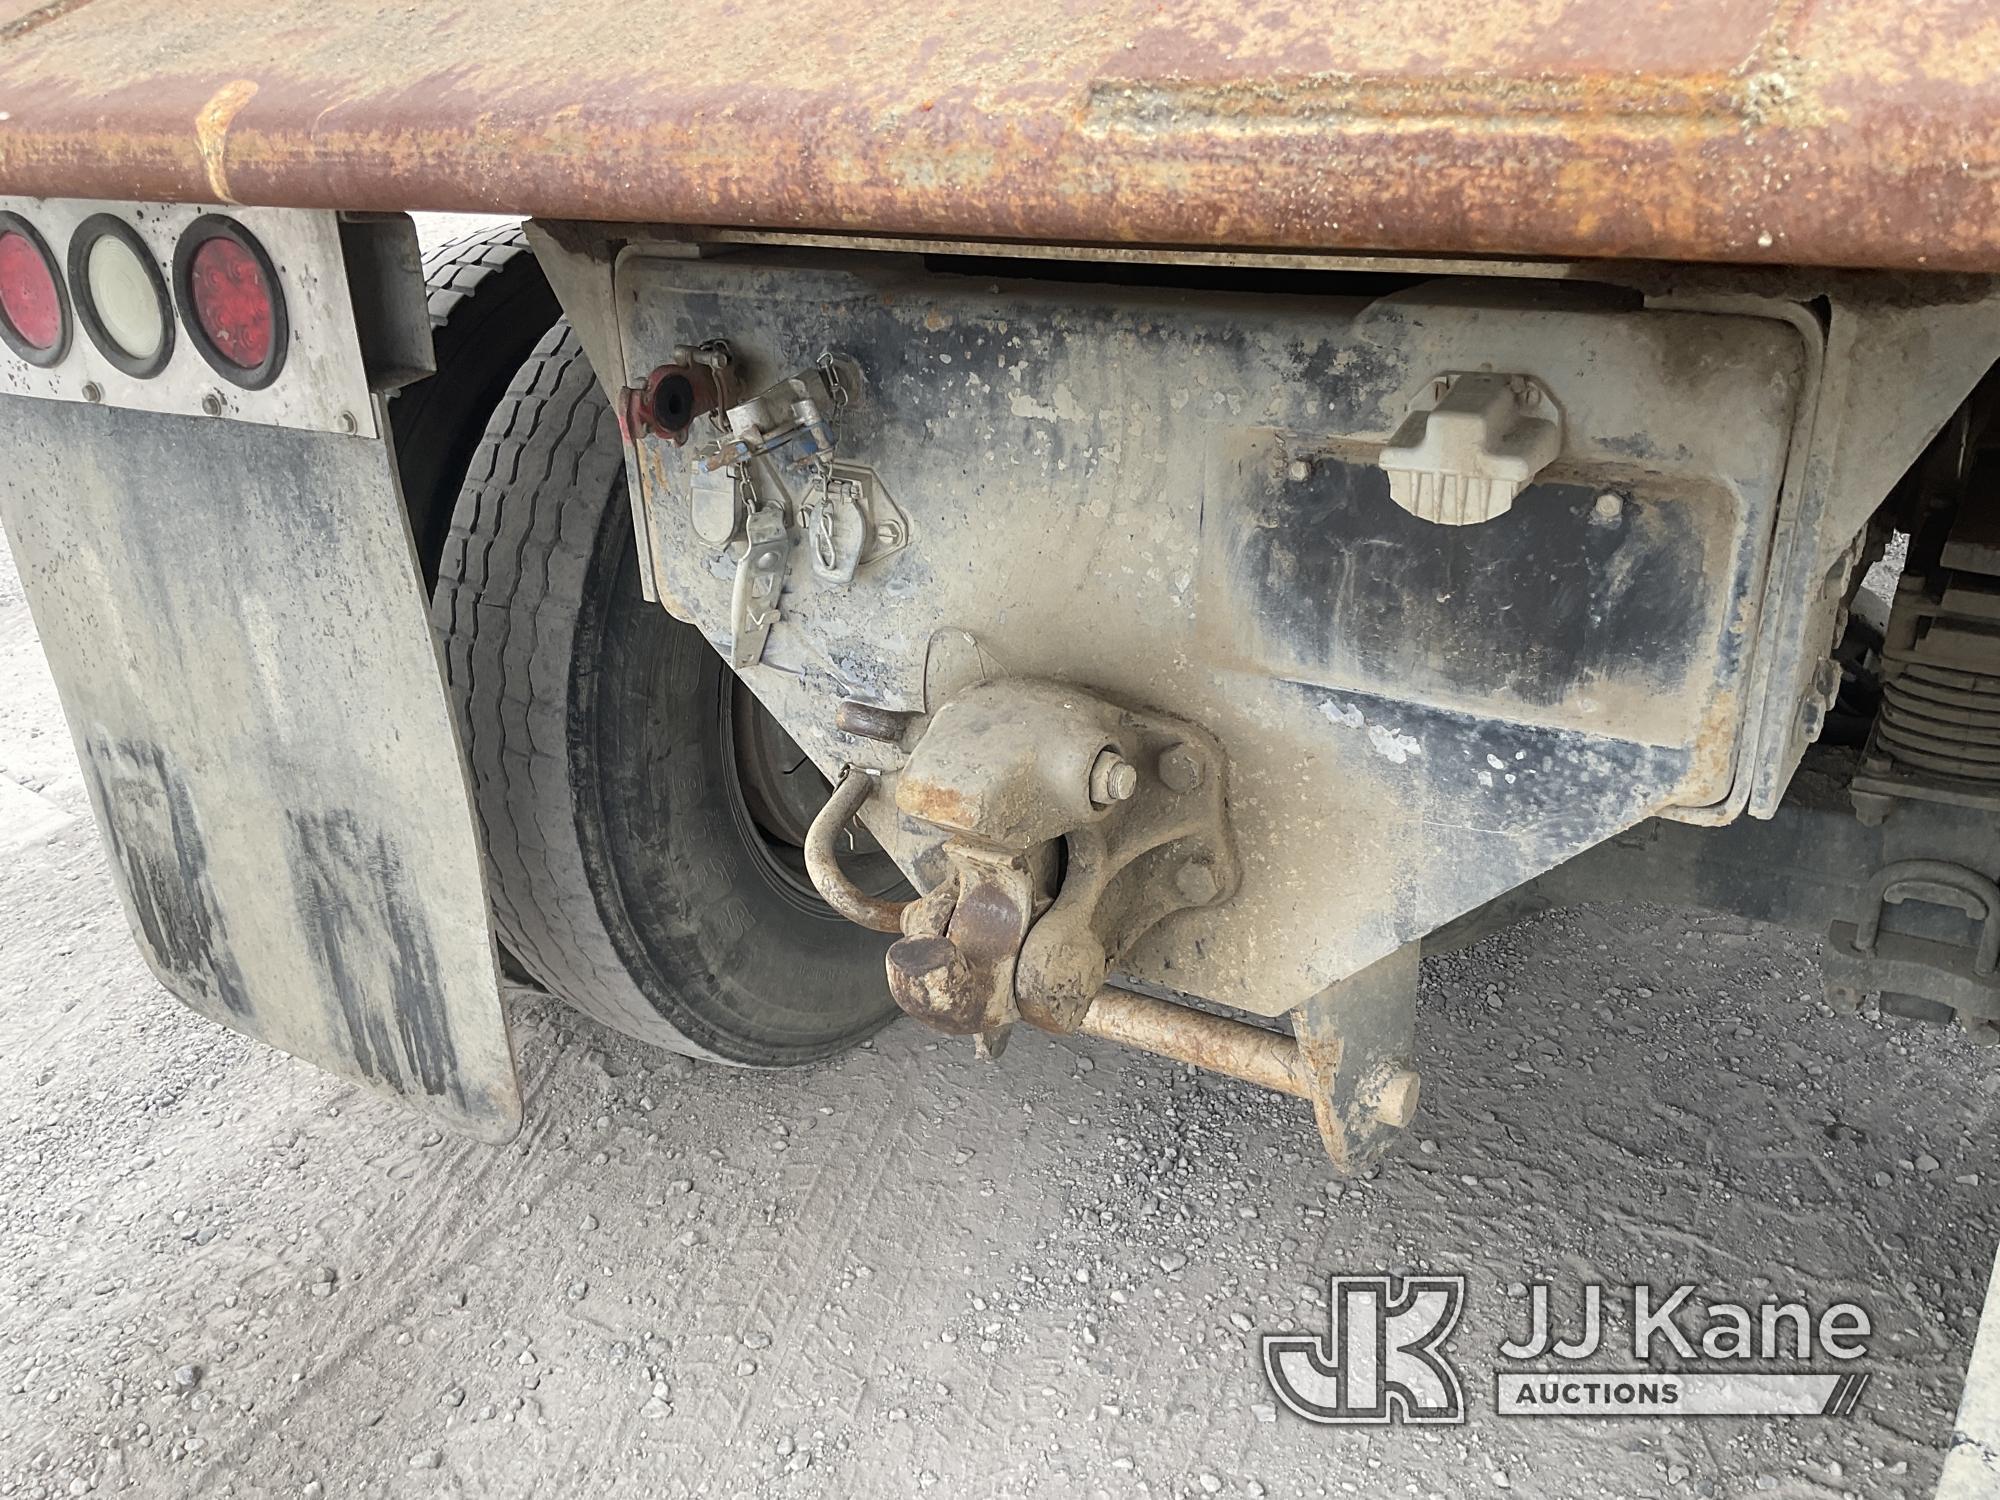 (Jurupa Valley, CA) 2008 Volvo VHD T/A Dump Truck Needs towing, Has Open Recall, Does Not Stay Runni